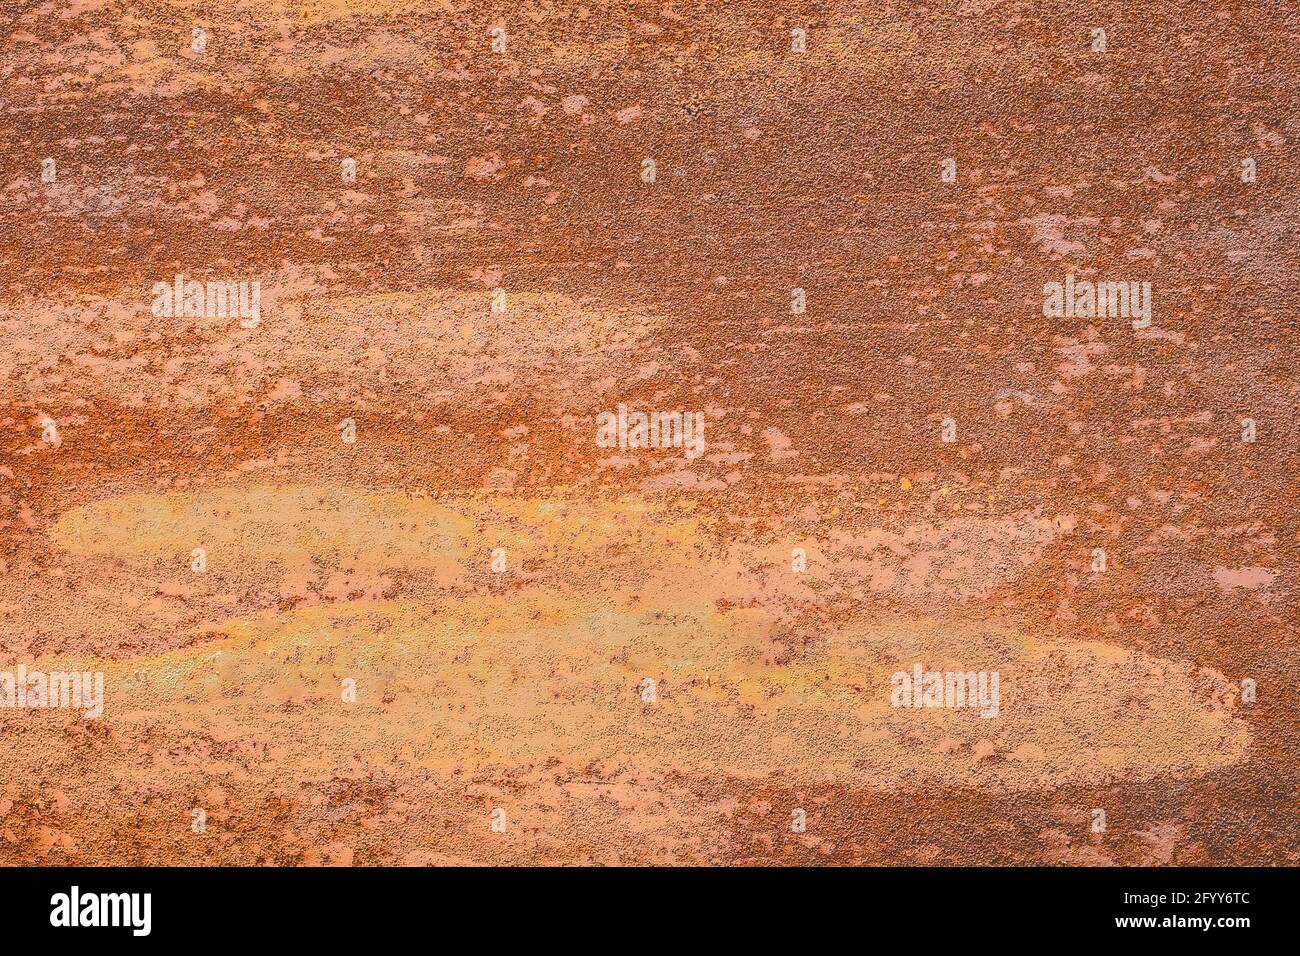 Old rusty metal texture, brown corrosion background. Stock Photo